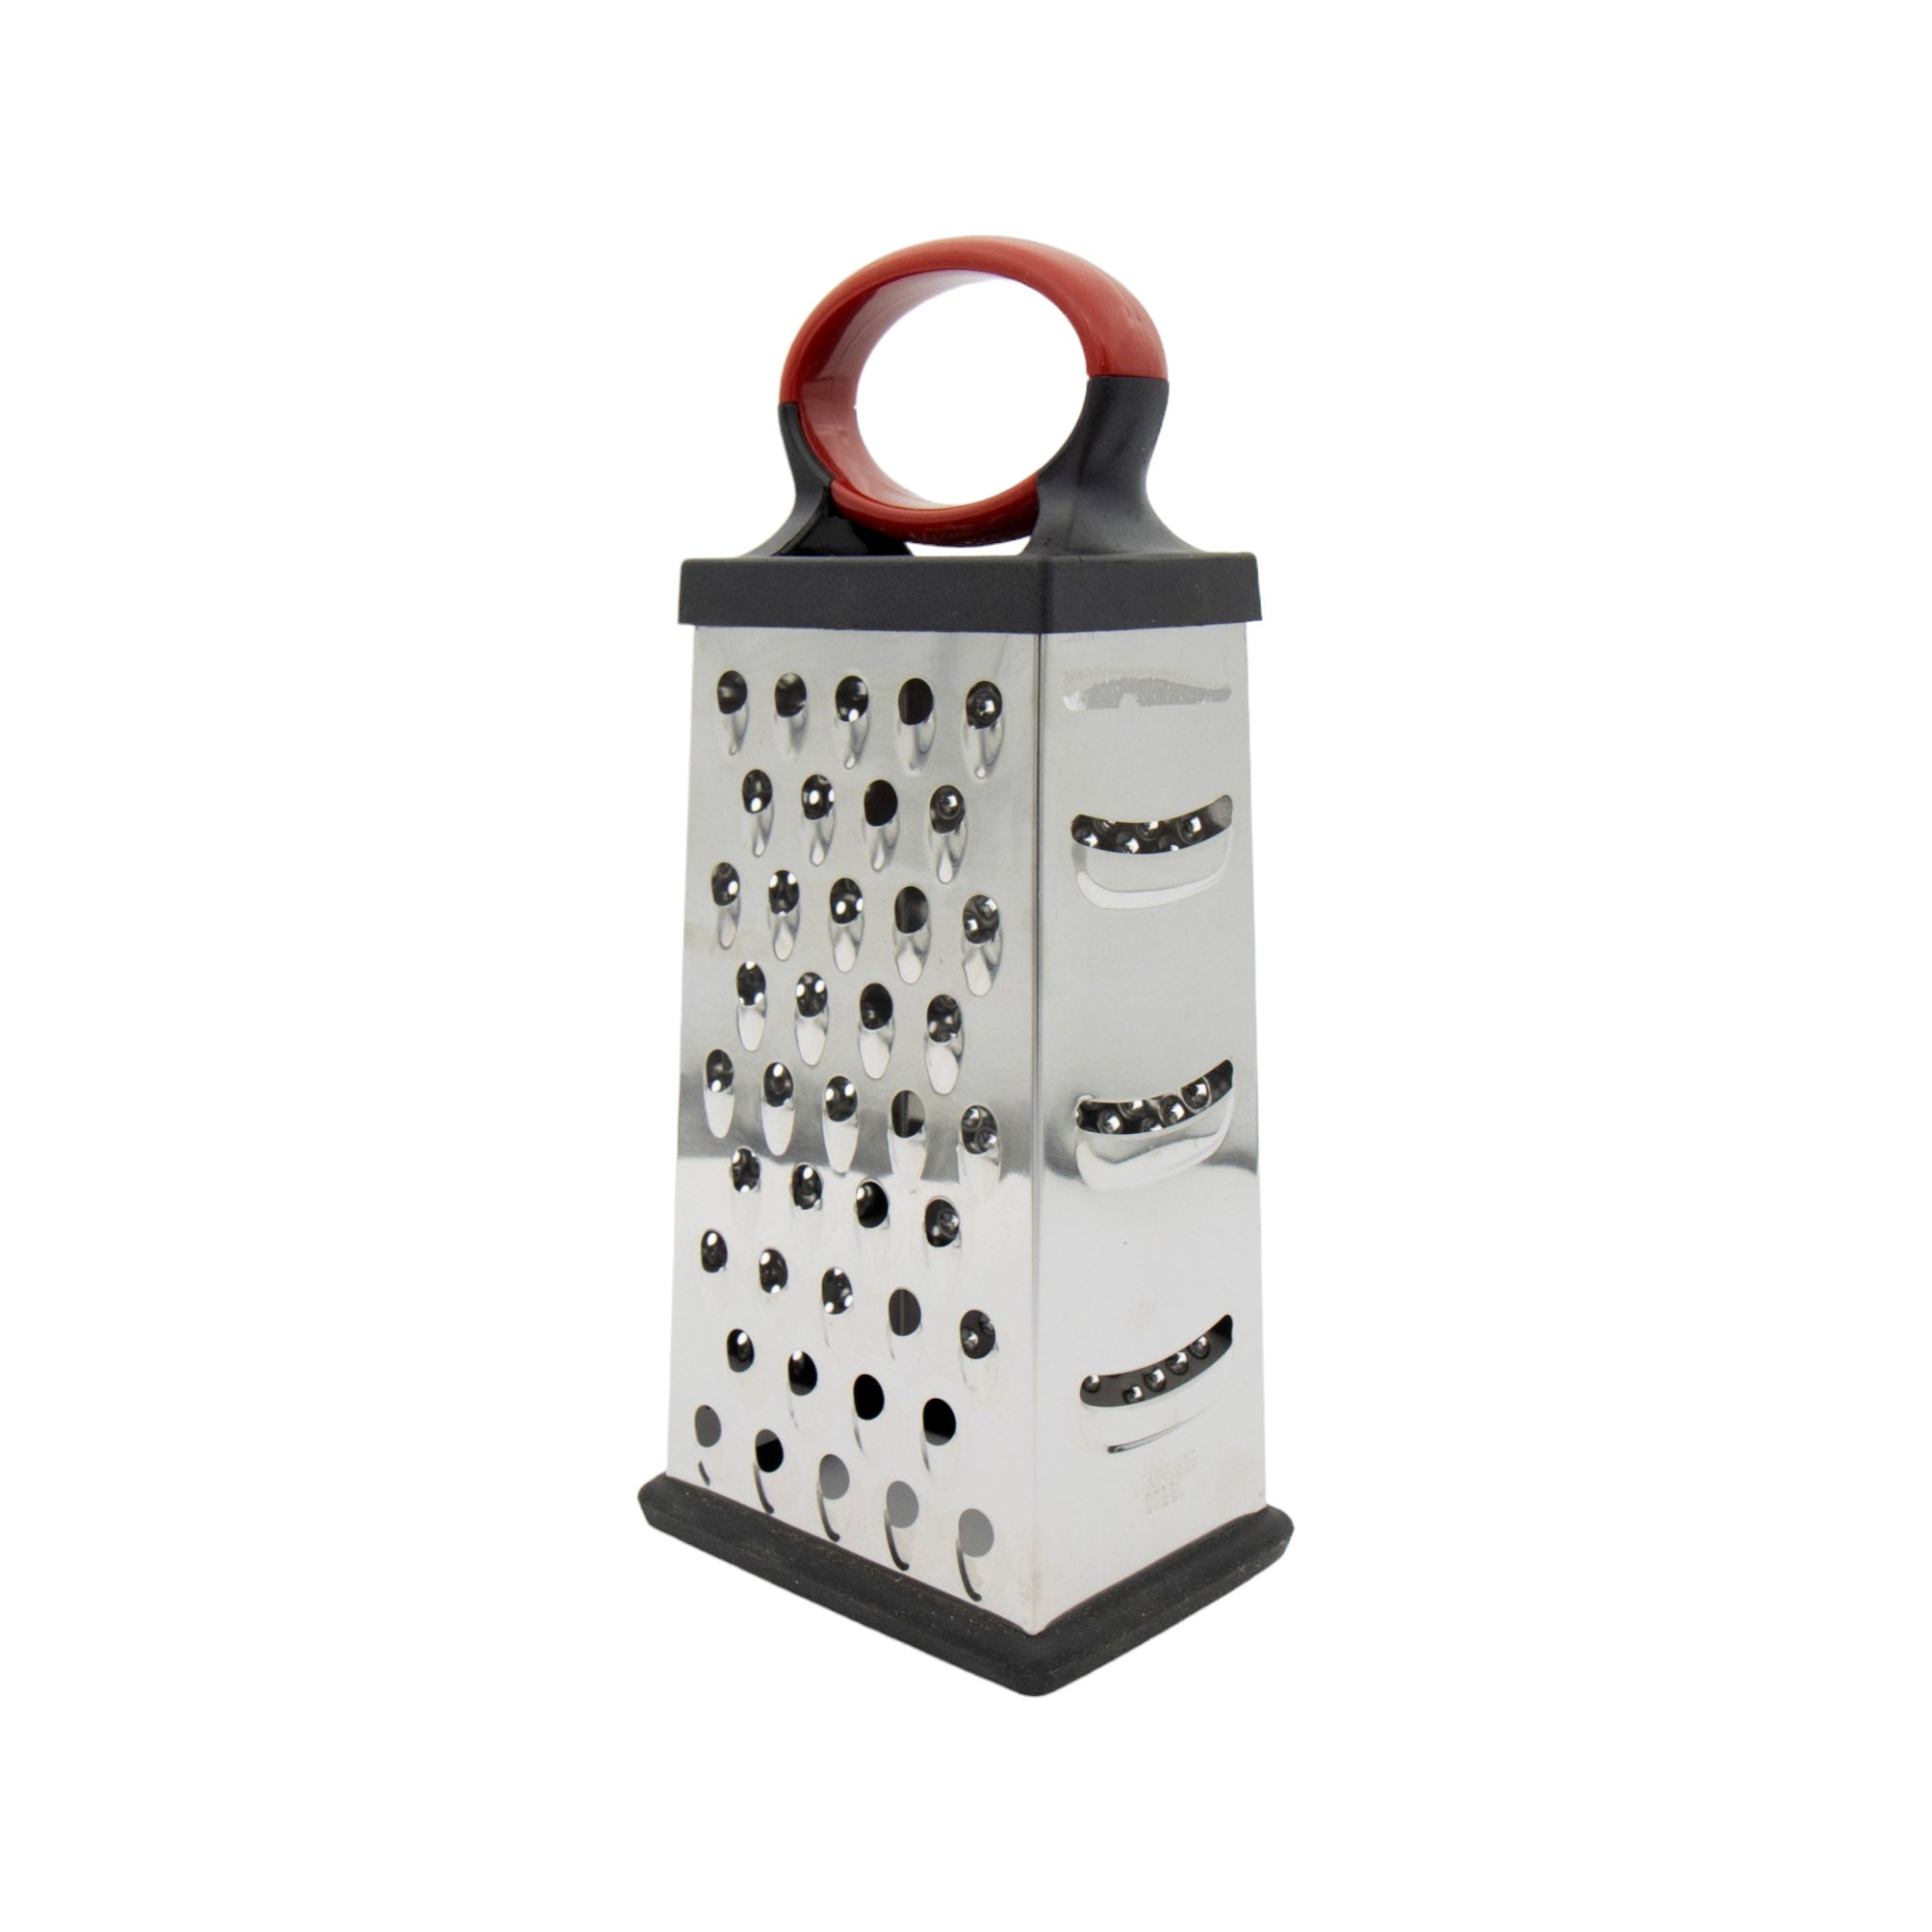 Grater Stainless Steel 4 Sided 6054